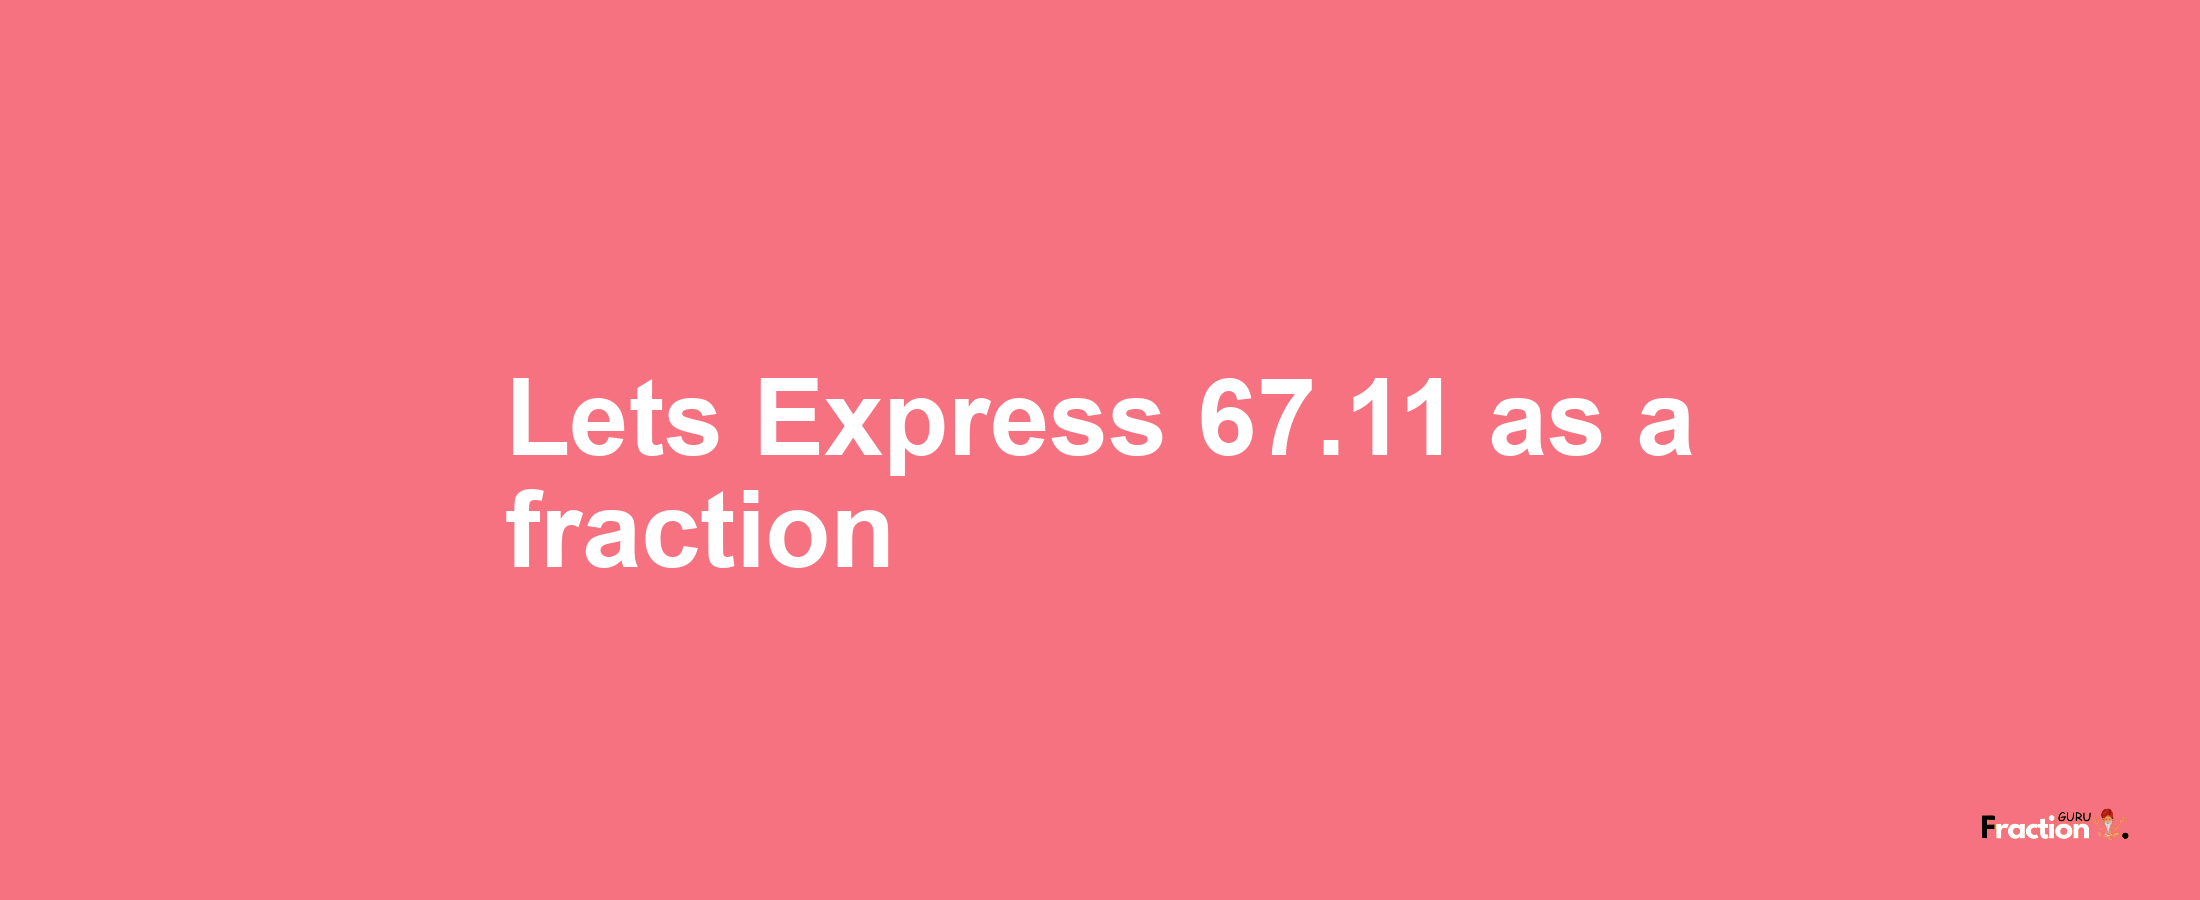 Lets Express 67.11 as afraction